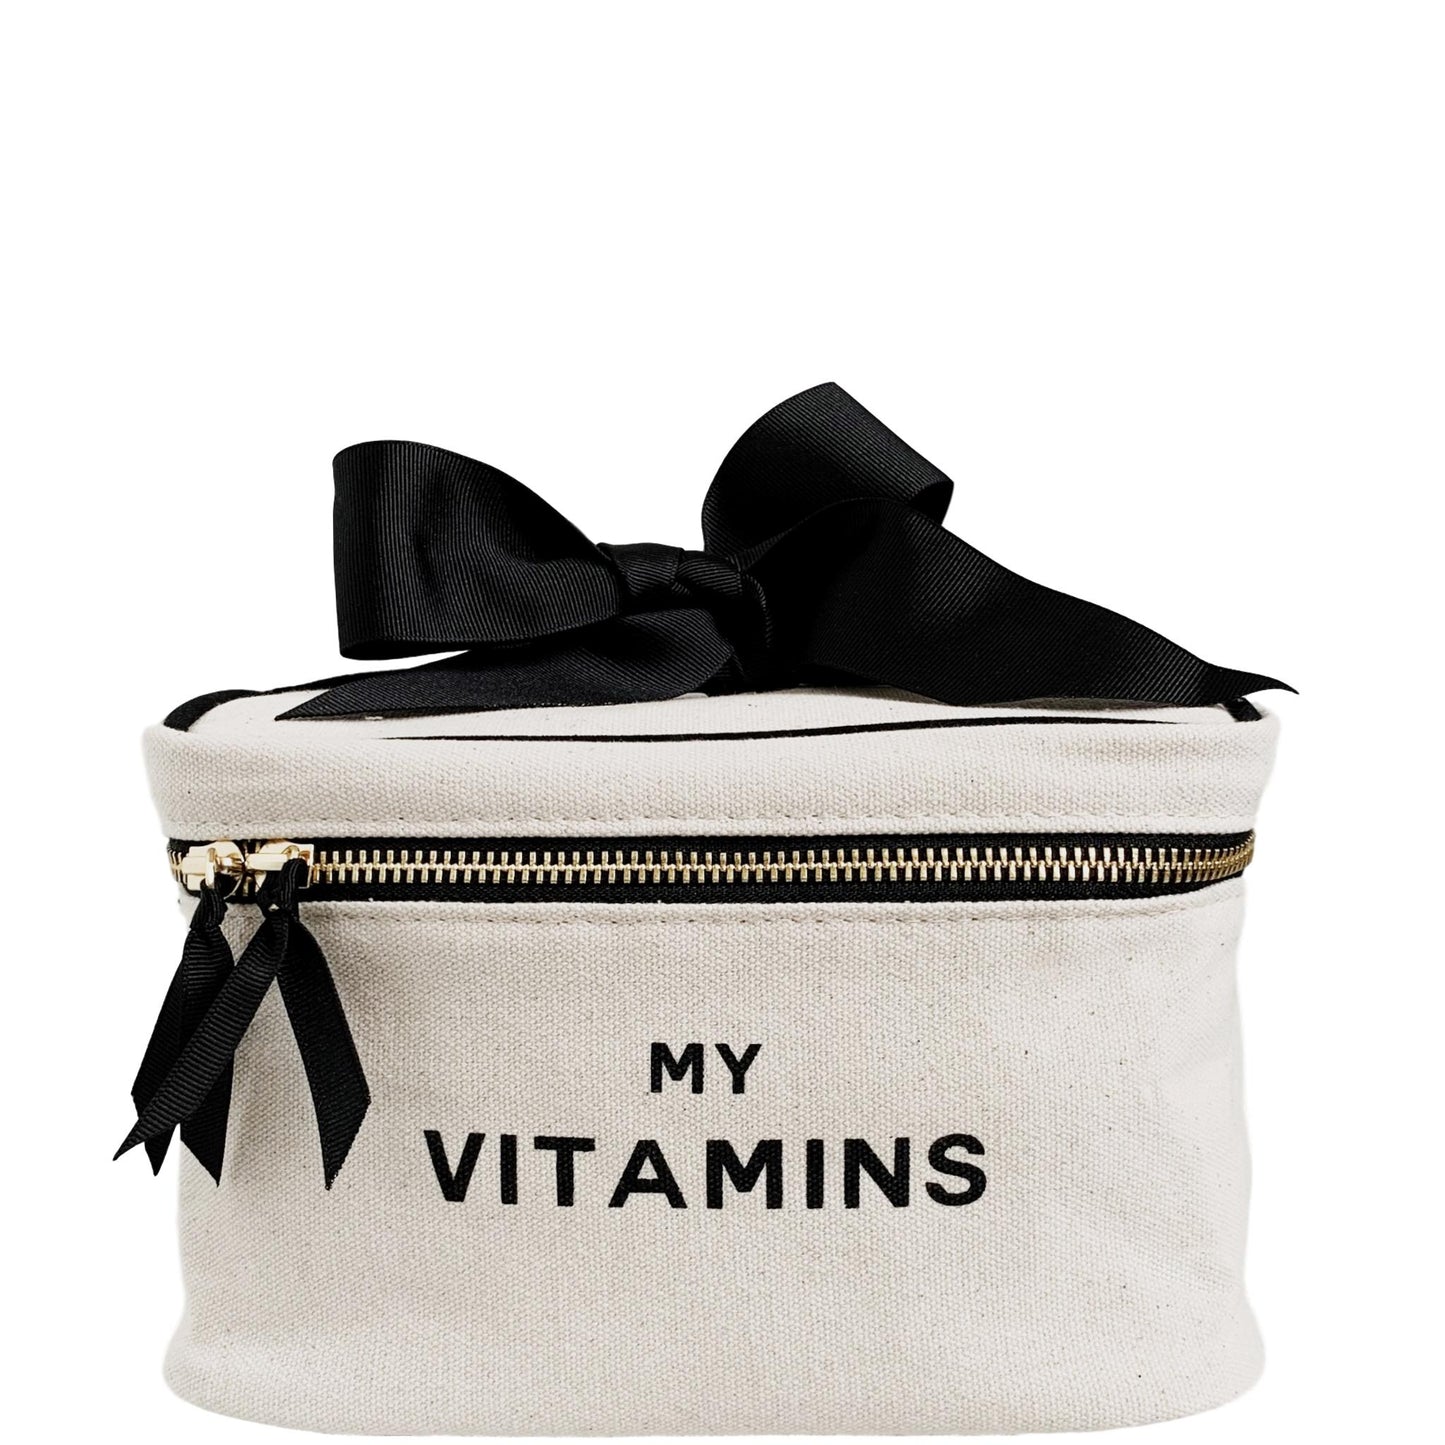 White box with "My vitamins" printed in black on the front. 